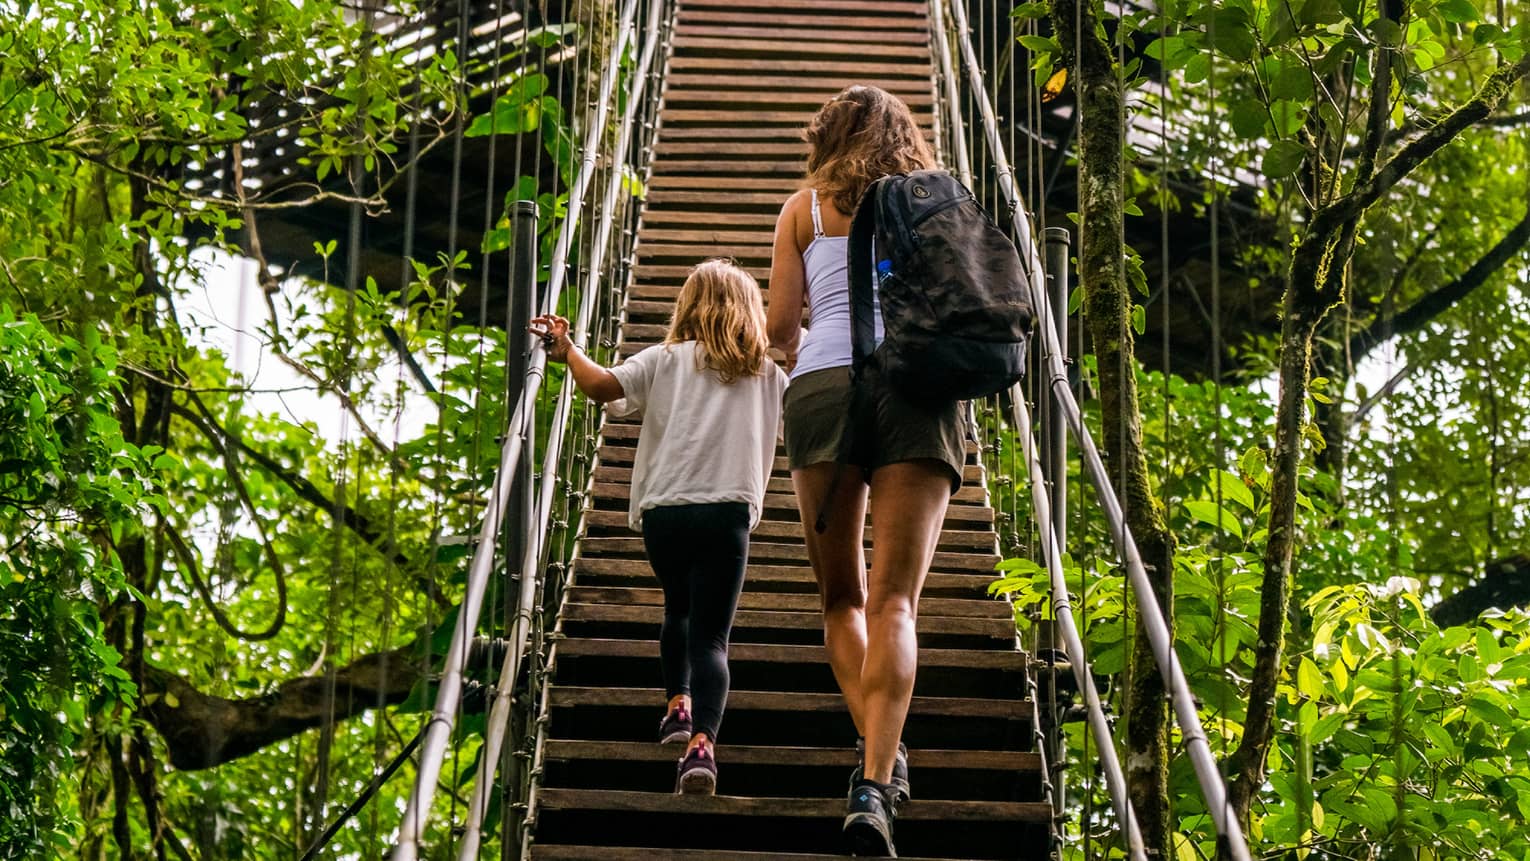 Rear view of an adult and child climbing a steep wooden staircase with metal rails toward a platform nestled in the treetops.